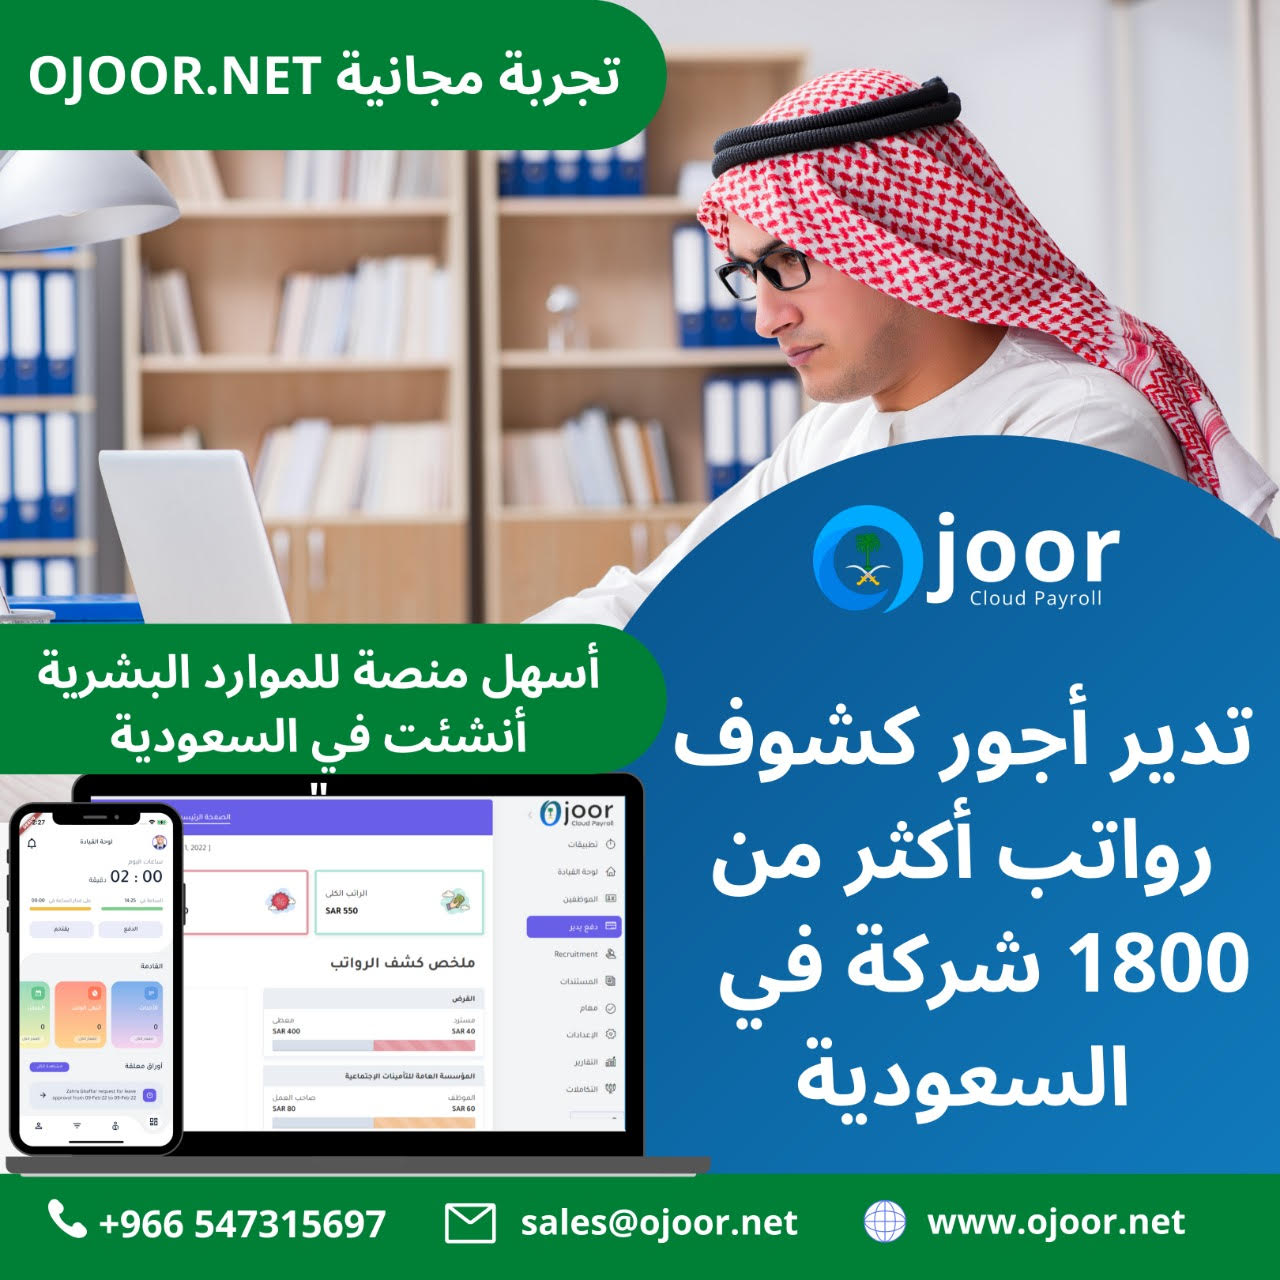 How to Implement Payroll Software in Saudi?